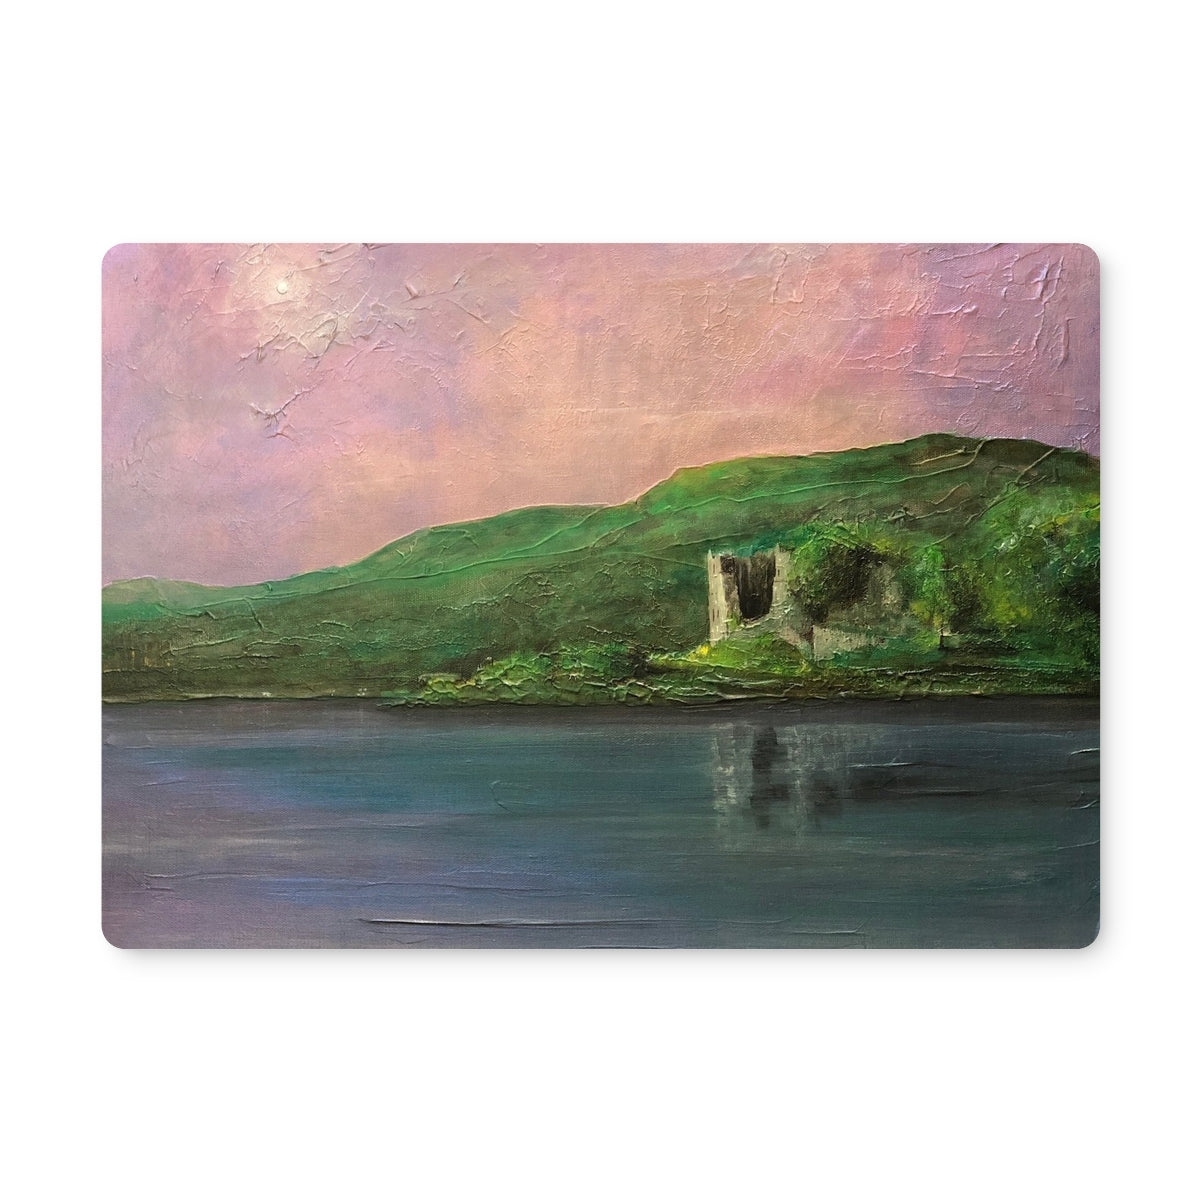 Old Castle Lachlan Art Gifts Placemat-Placemats-Historic & Iconic Scotland Art Gallery-2 Placemats-Paintings, Prints, Homeware, Art Gifts From Scotland By Scottish Artist Kevin Hunter